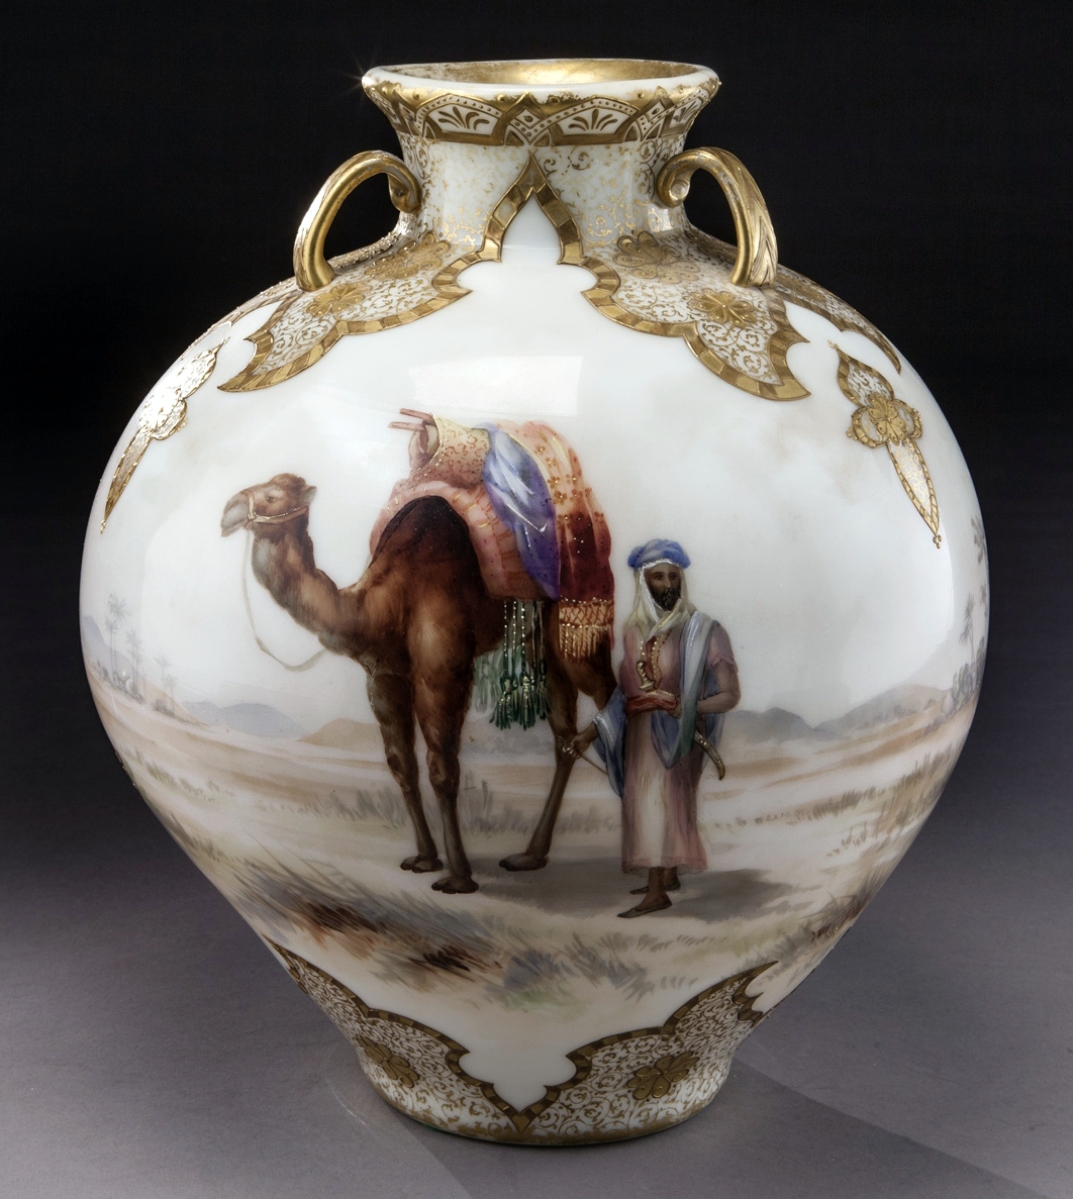 From the John W. Lolley collection, this Mount Washington colonial ware “Garden of Allah” glass vase decorated with Egyptian scene of camels Bedouin was the top seller in the first offering, settling within estimate at $5,938.